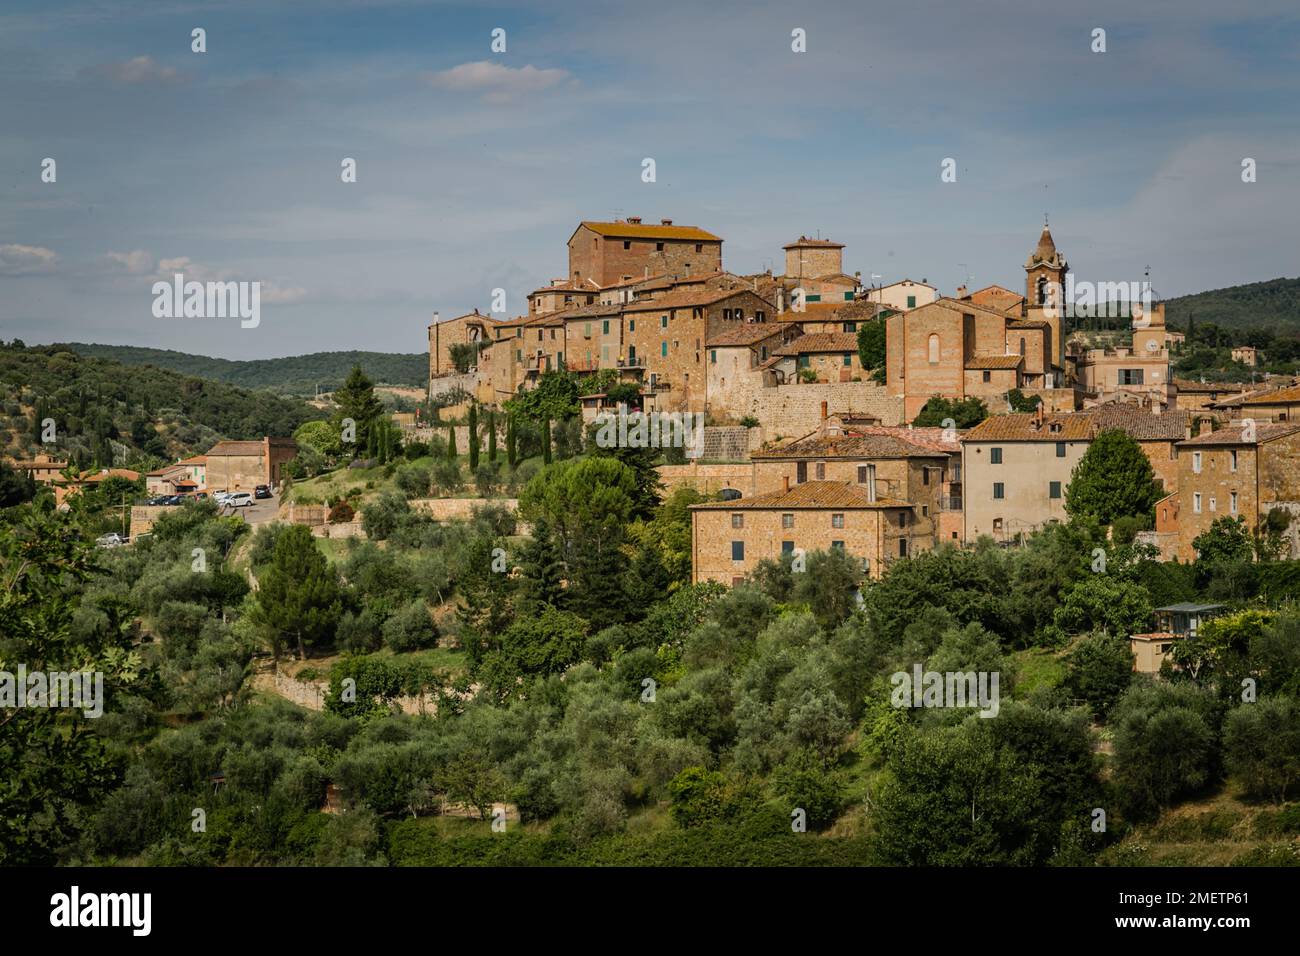 View of stone buildings nestled in the quaint hilltop village of Montisi, Tuscany, Italy. Stock Photo